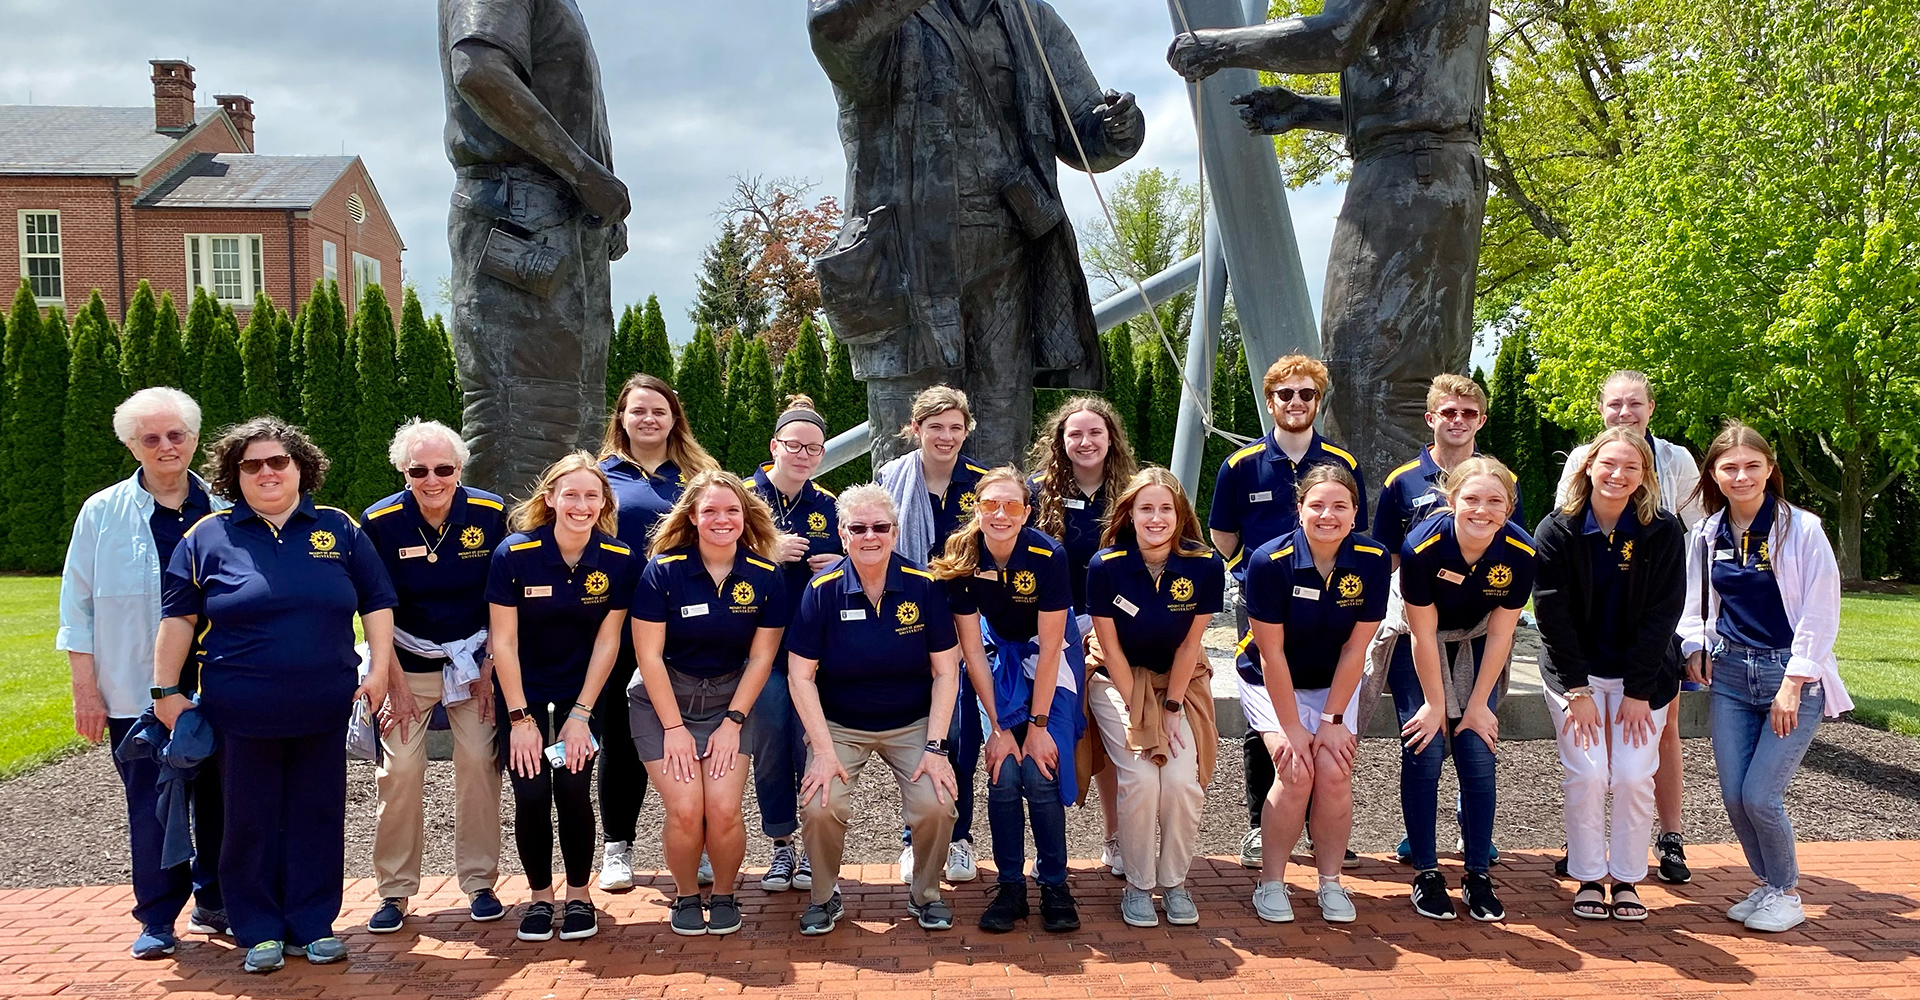 MSJ mission ambassadors on pilgrimage in front of historical statues outside.